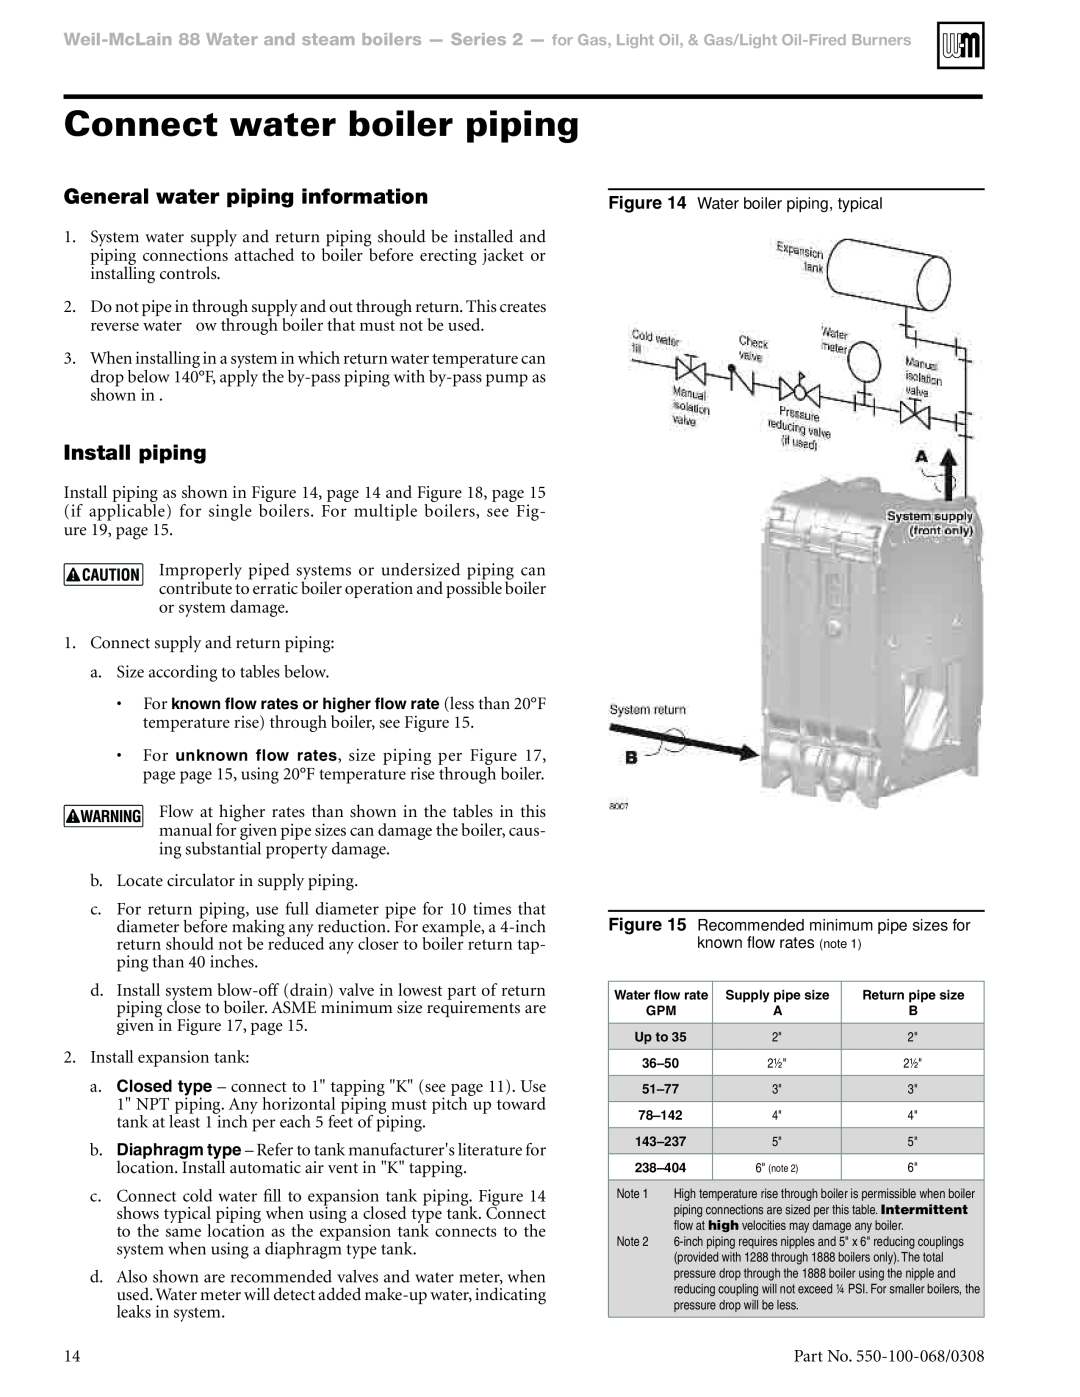 Weil-McLain 88 manual Connect water boiler piping, General water piping information, Install piping 